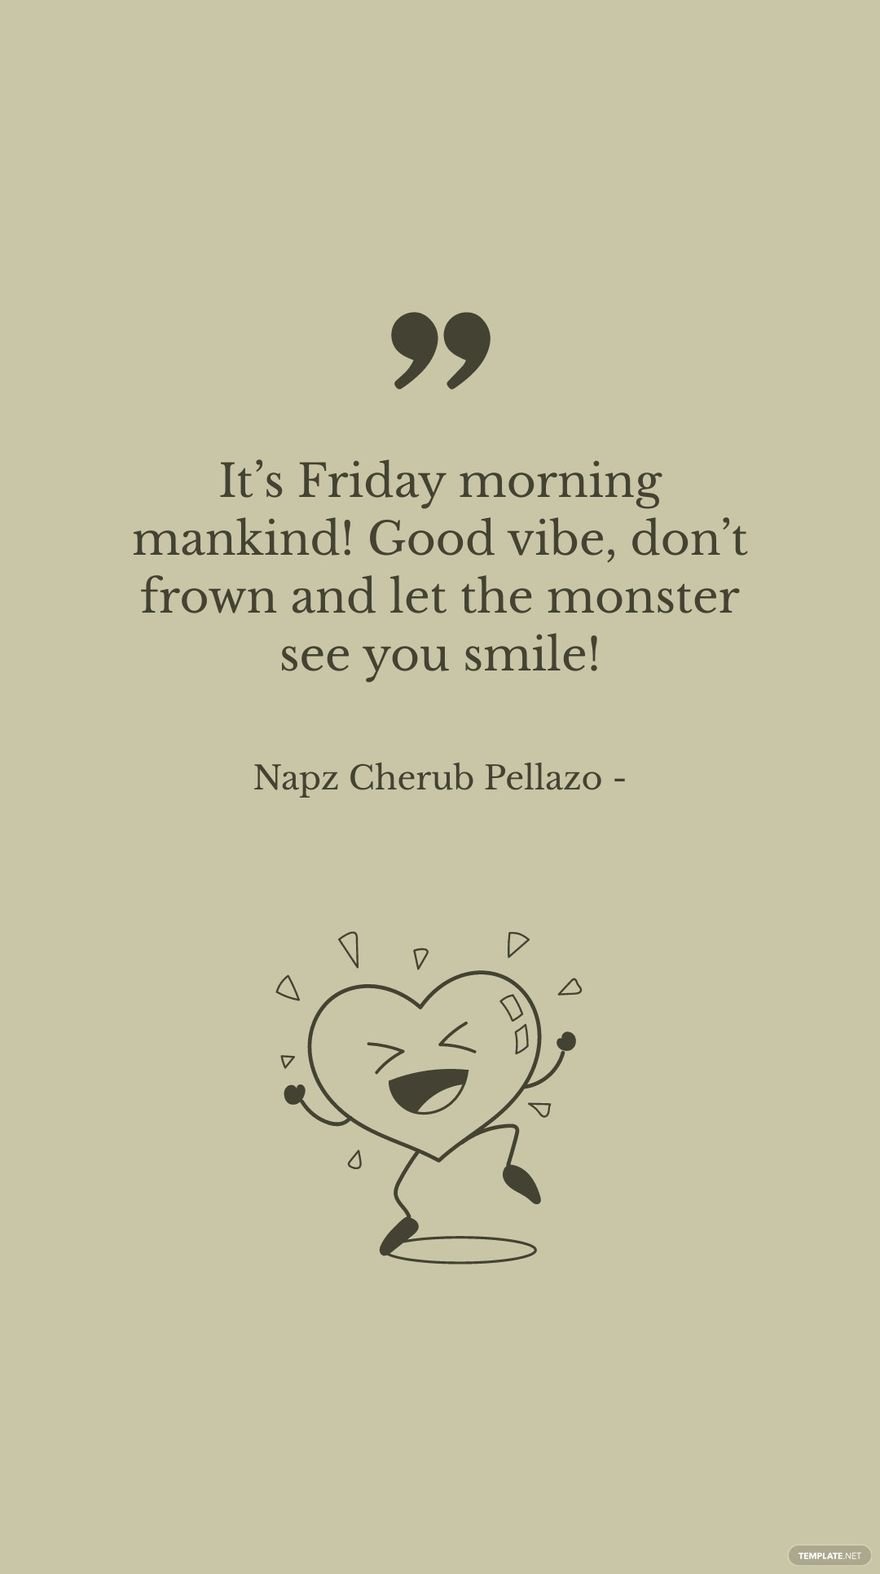 Free Napz Cherub Pellazo - It’s Friday morning mankind! Good vibe, don’t frown and let the monster see you smile!